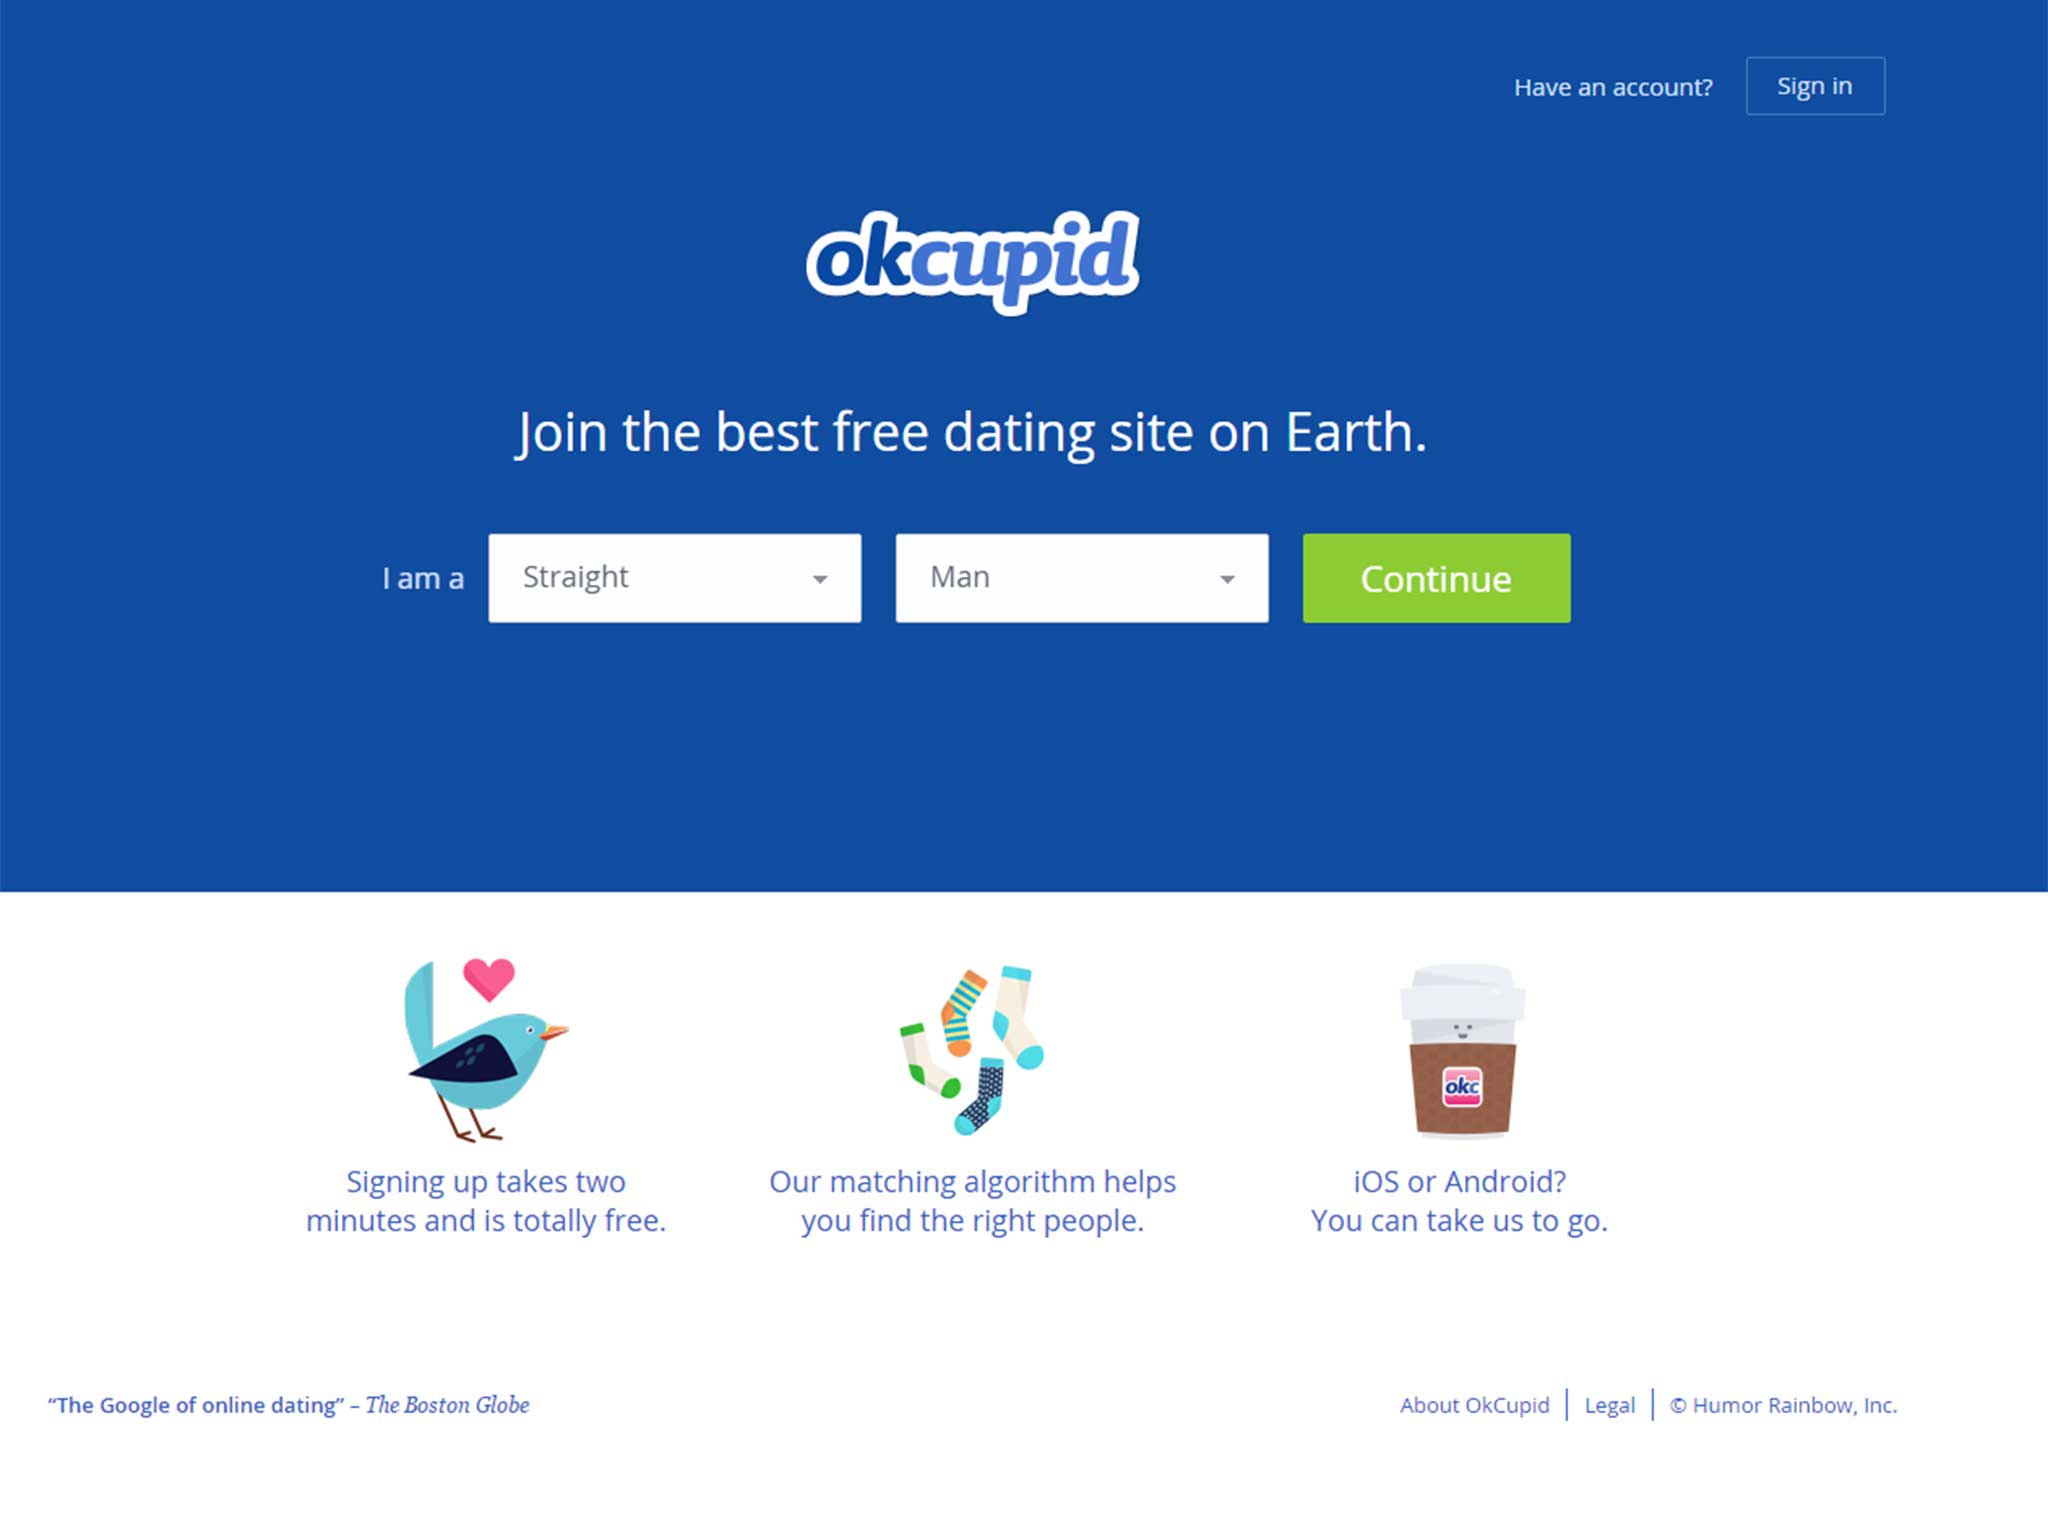 OkCupid has expanded its sexual orientation and gender options